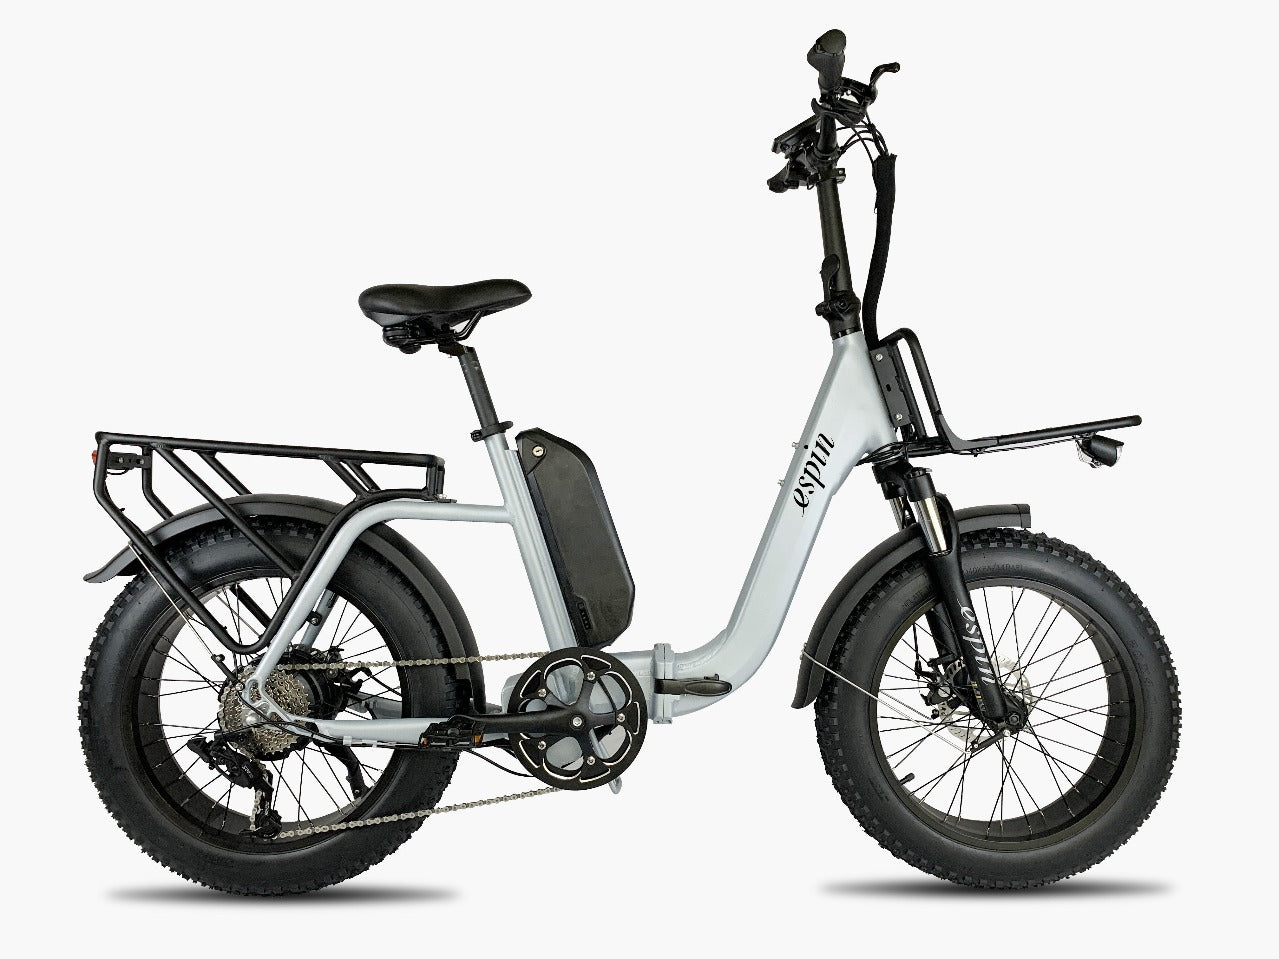 Electric Bike Shipping. Available shipping options are determined by postal code. You will be able to select your preferred shipping option during checkout.